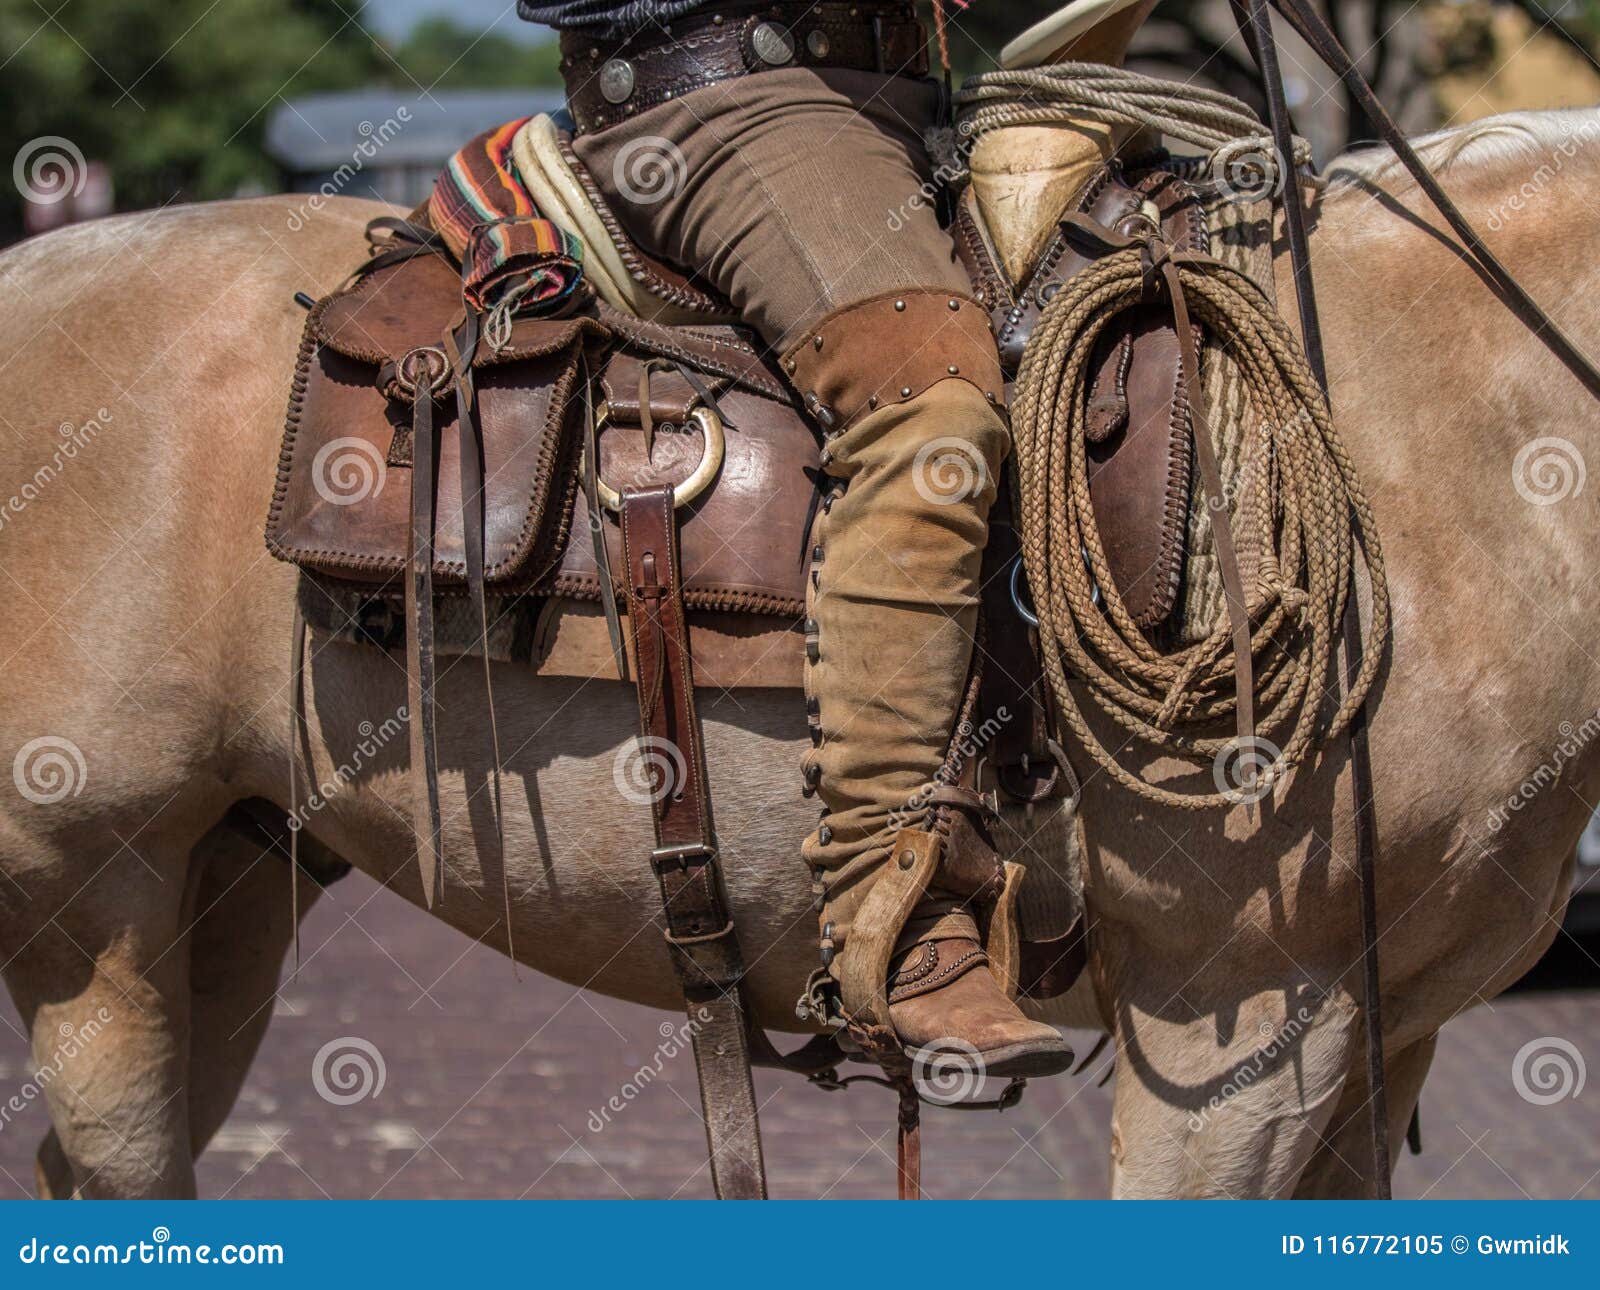 traditional vaquero outfit